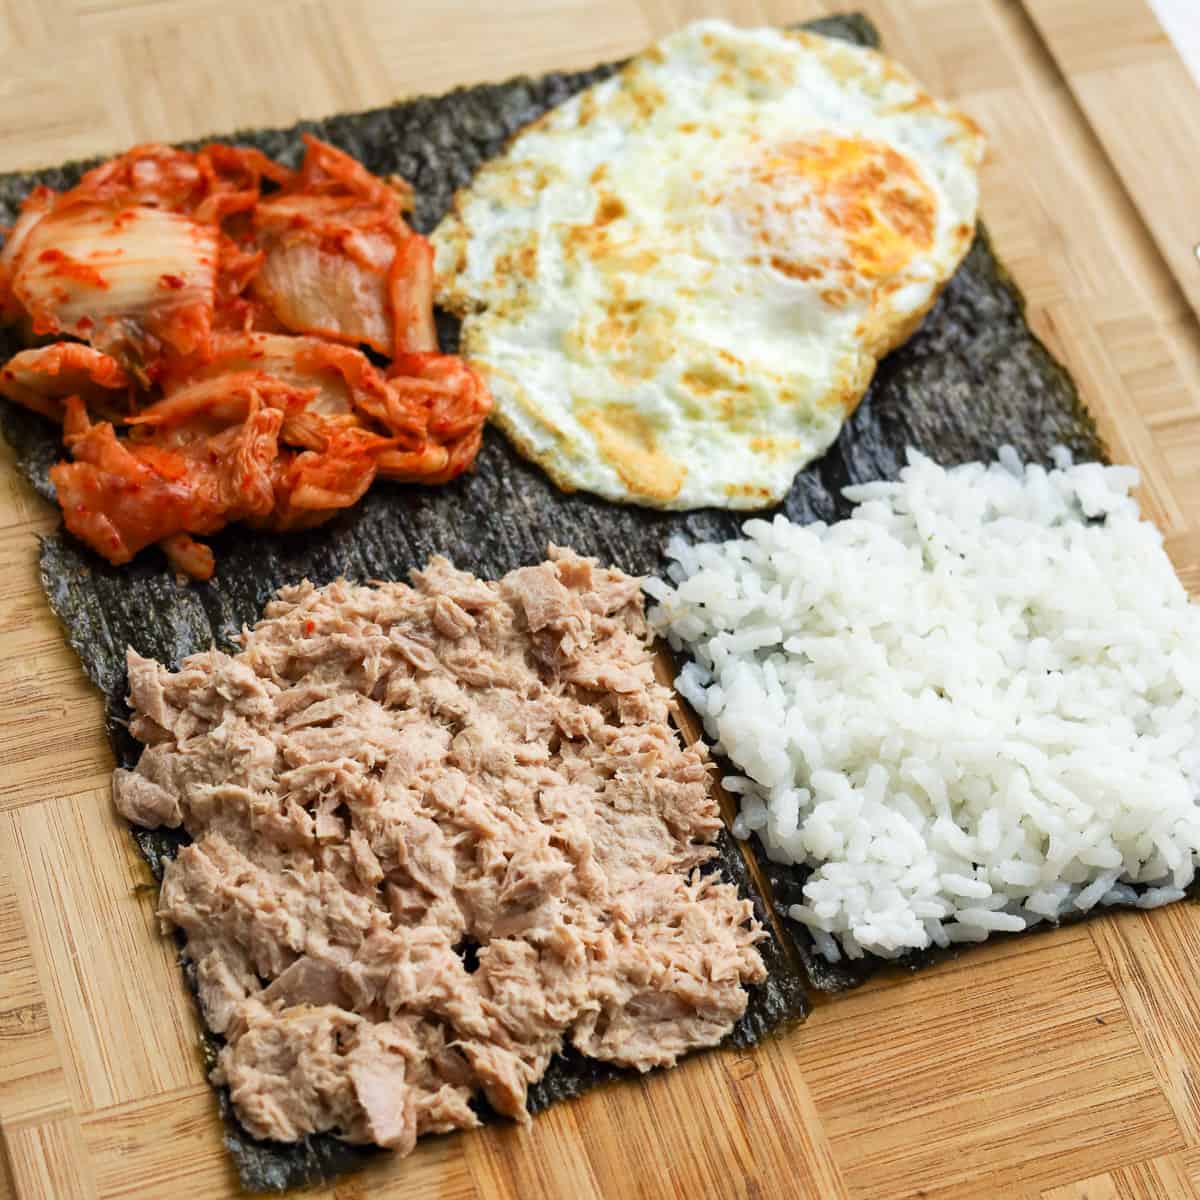 Evenly spread the tuna mayo mixture in the bottom left quadrant. Place the fried egg in the top right quadrant. Spread kimchi in the top left quadrant. Lastly, evenly spread hot cooked rice in the bottom right quadrant. 